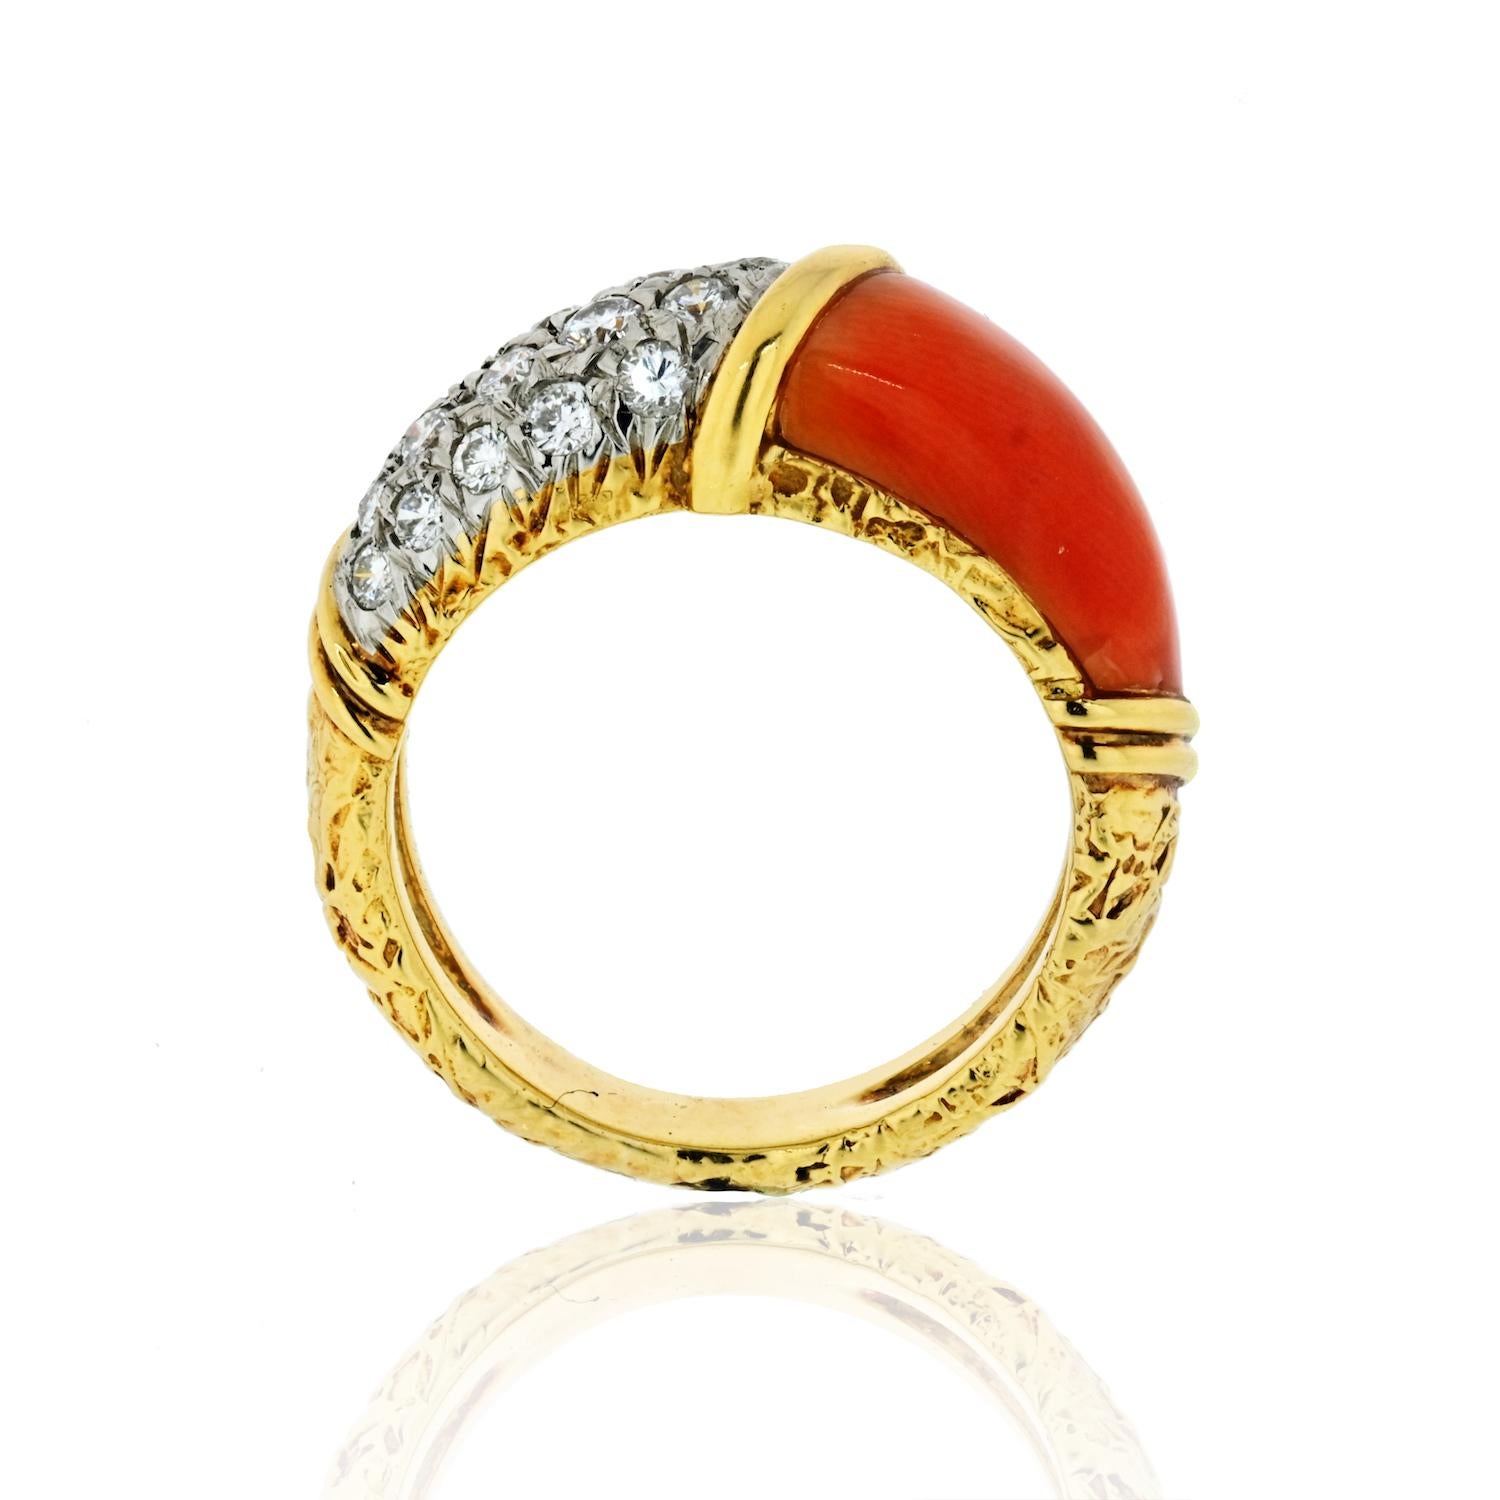 Modern Van Cleef & Arpels circa 1960 Coral and Diamond Band Ring